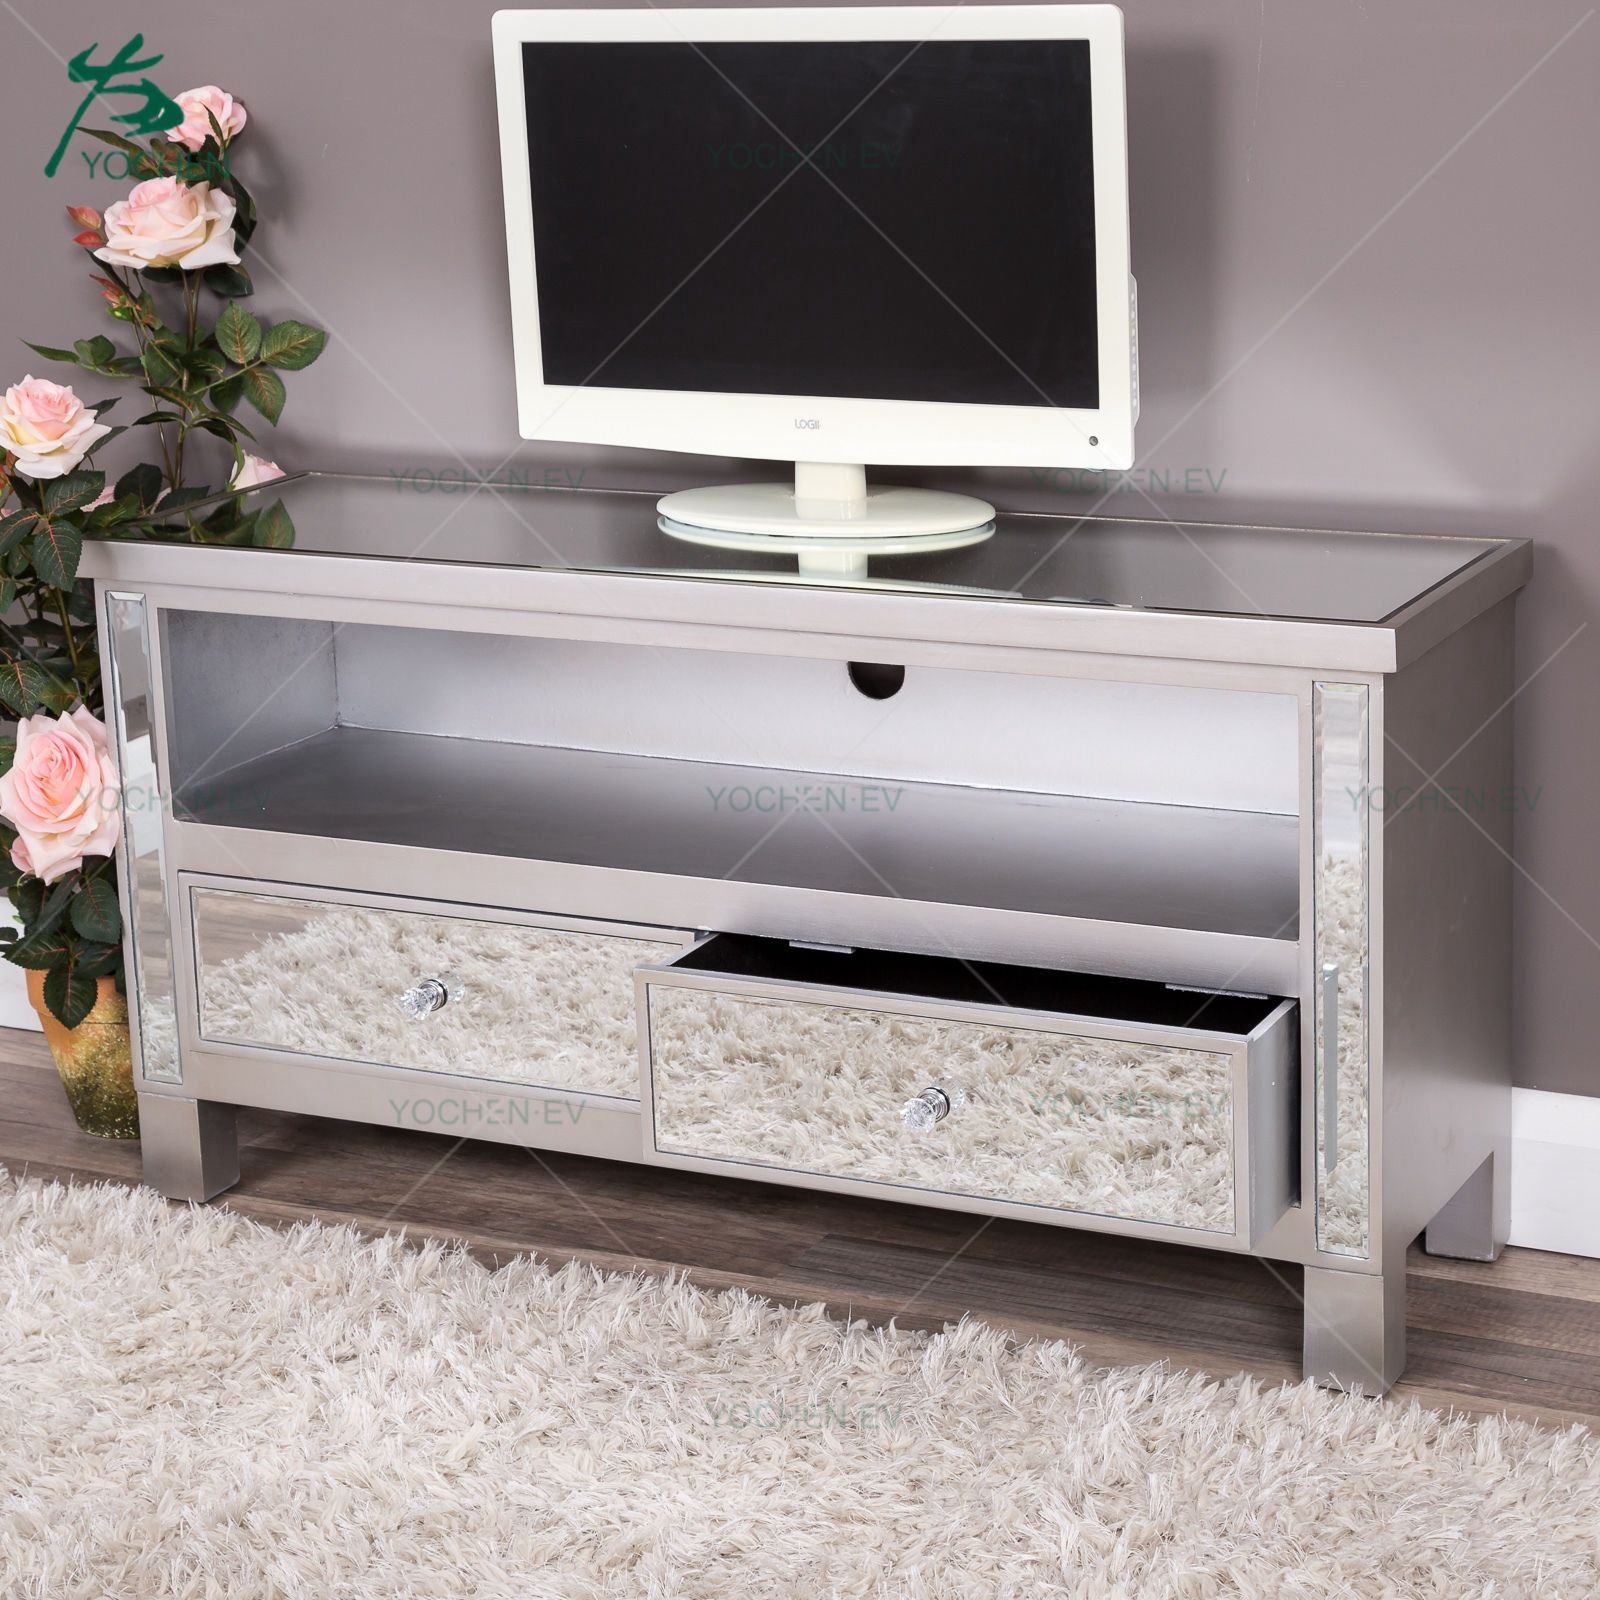 Two Drawers Silver Glass Mirrored Tv Stand For Mirrored Tv Cabinets (View 4 of 15)